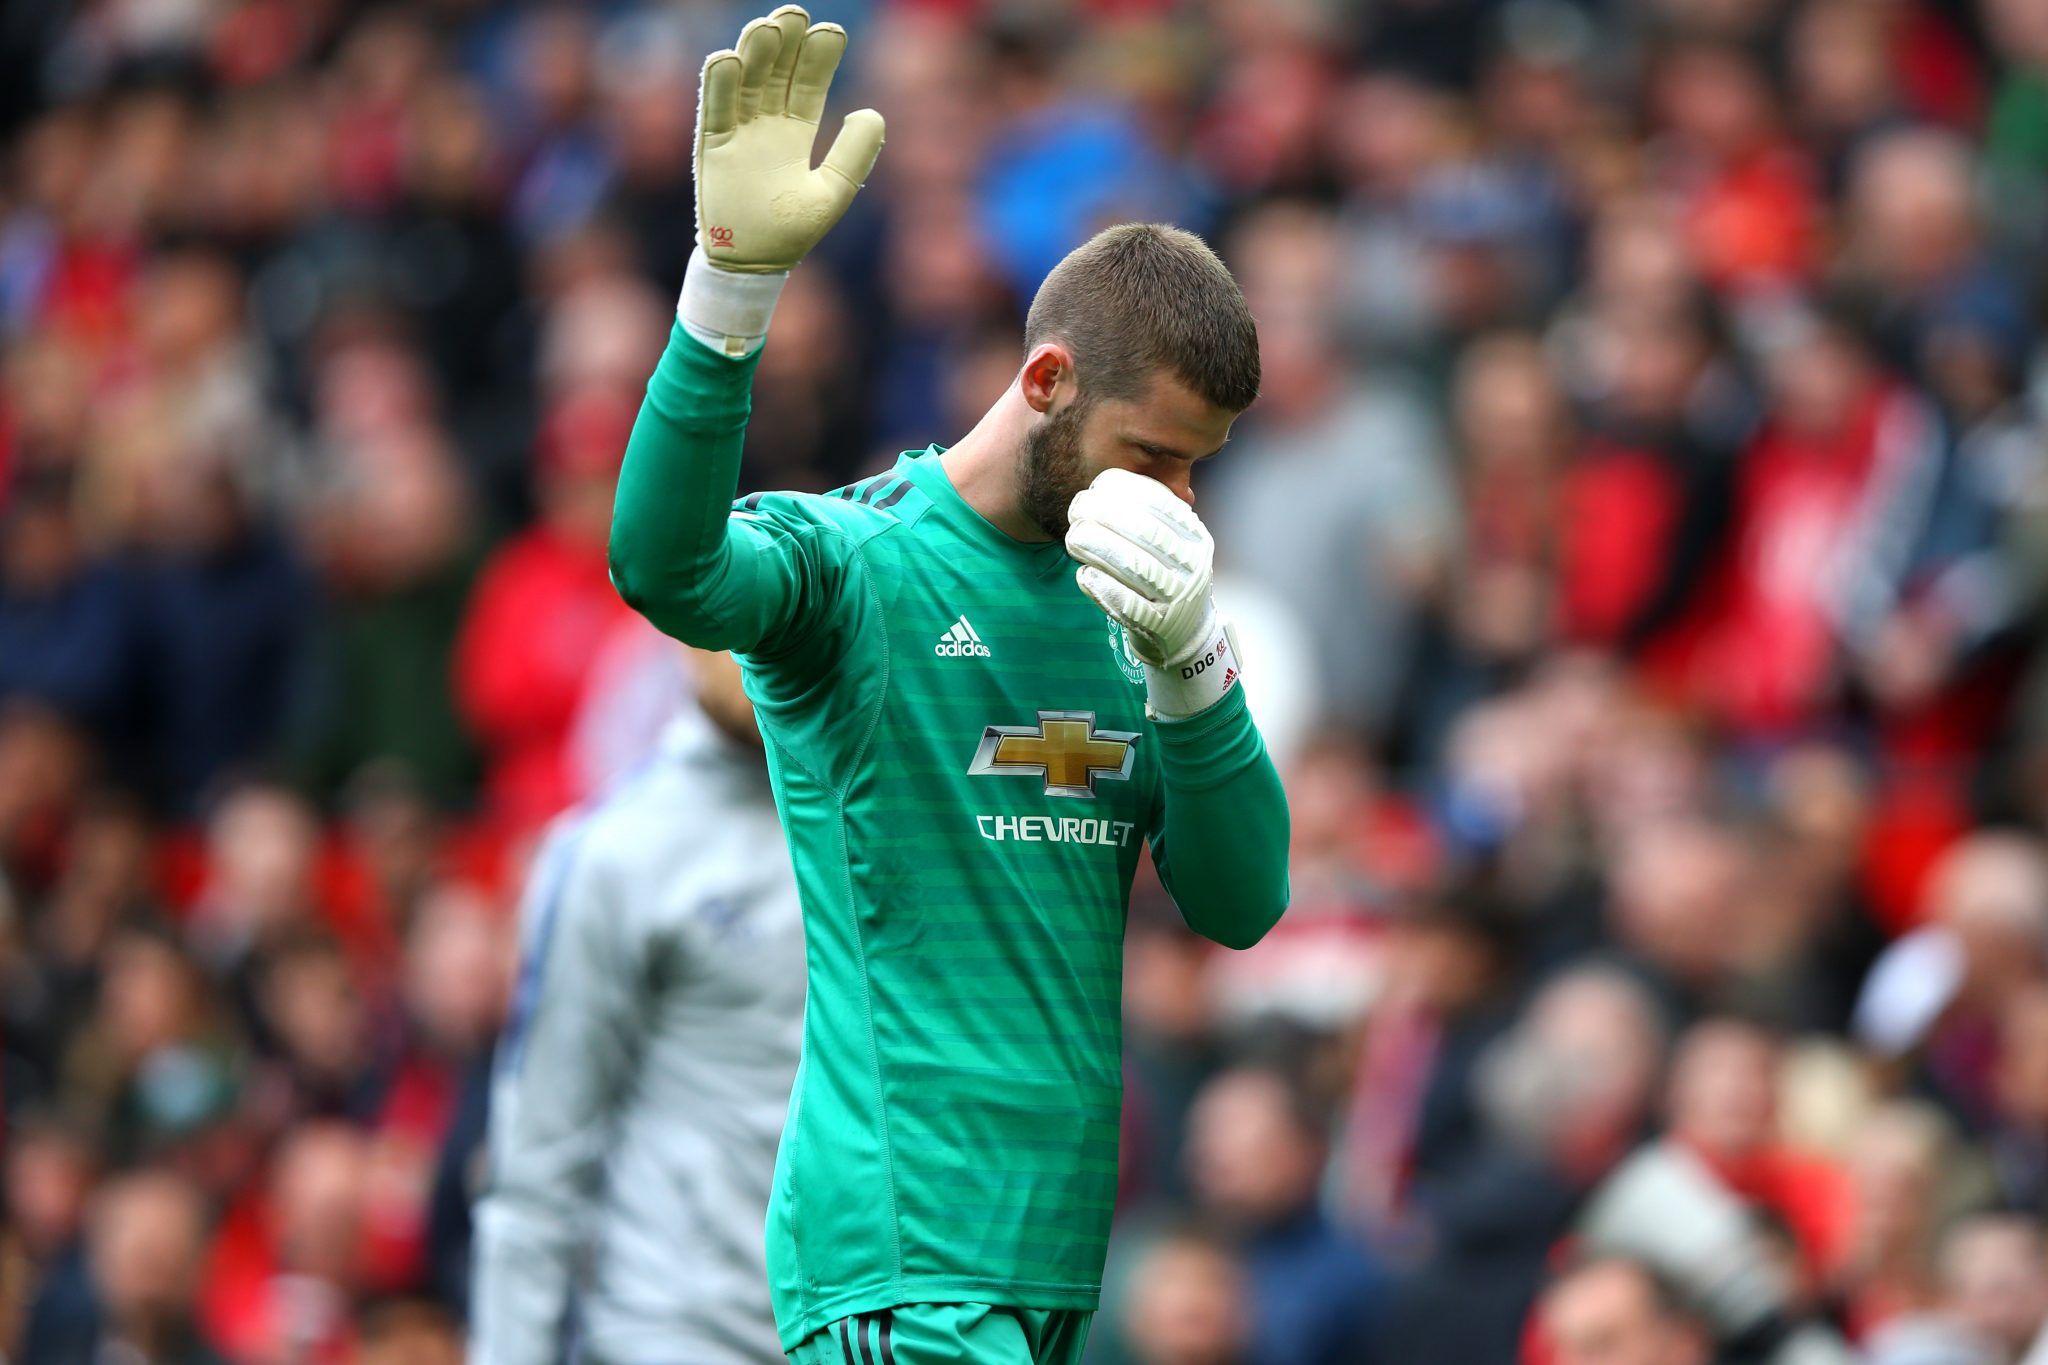 David De Gea of Manchester United looks on as he is beaten by Marcos Alonso of Chelsea as he scores his team's first goal during the Premier League match between Manchester United and Chelsea FC at Old Trafford on April 28, 2019 in Manchester, United Kingdom. (Photo by Shaun Botterill/Getty Images)